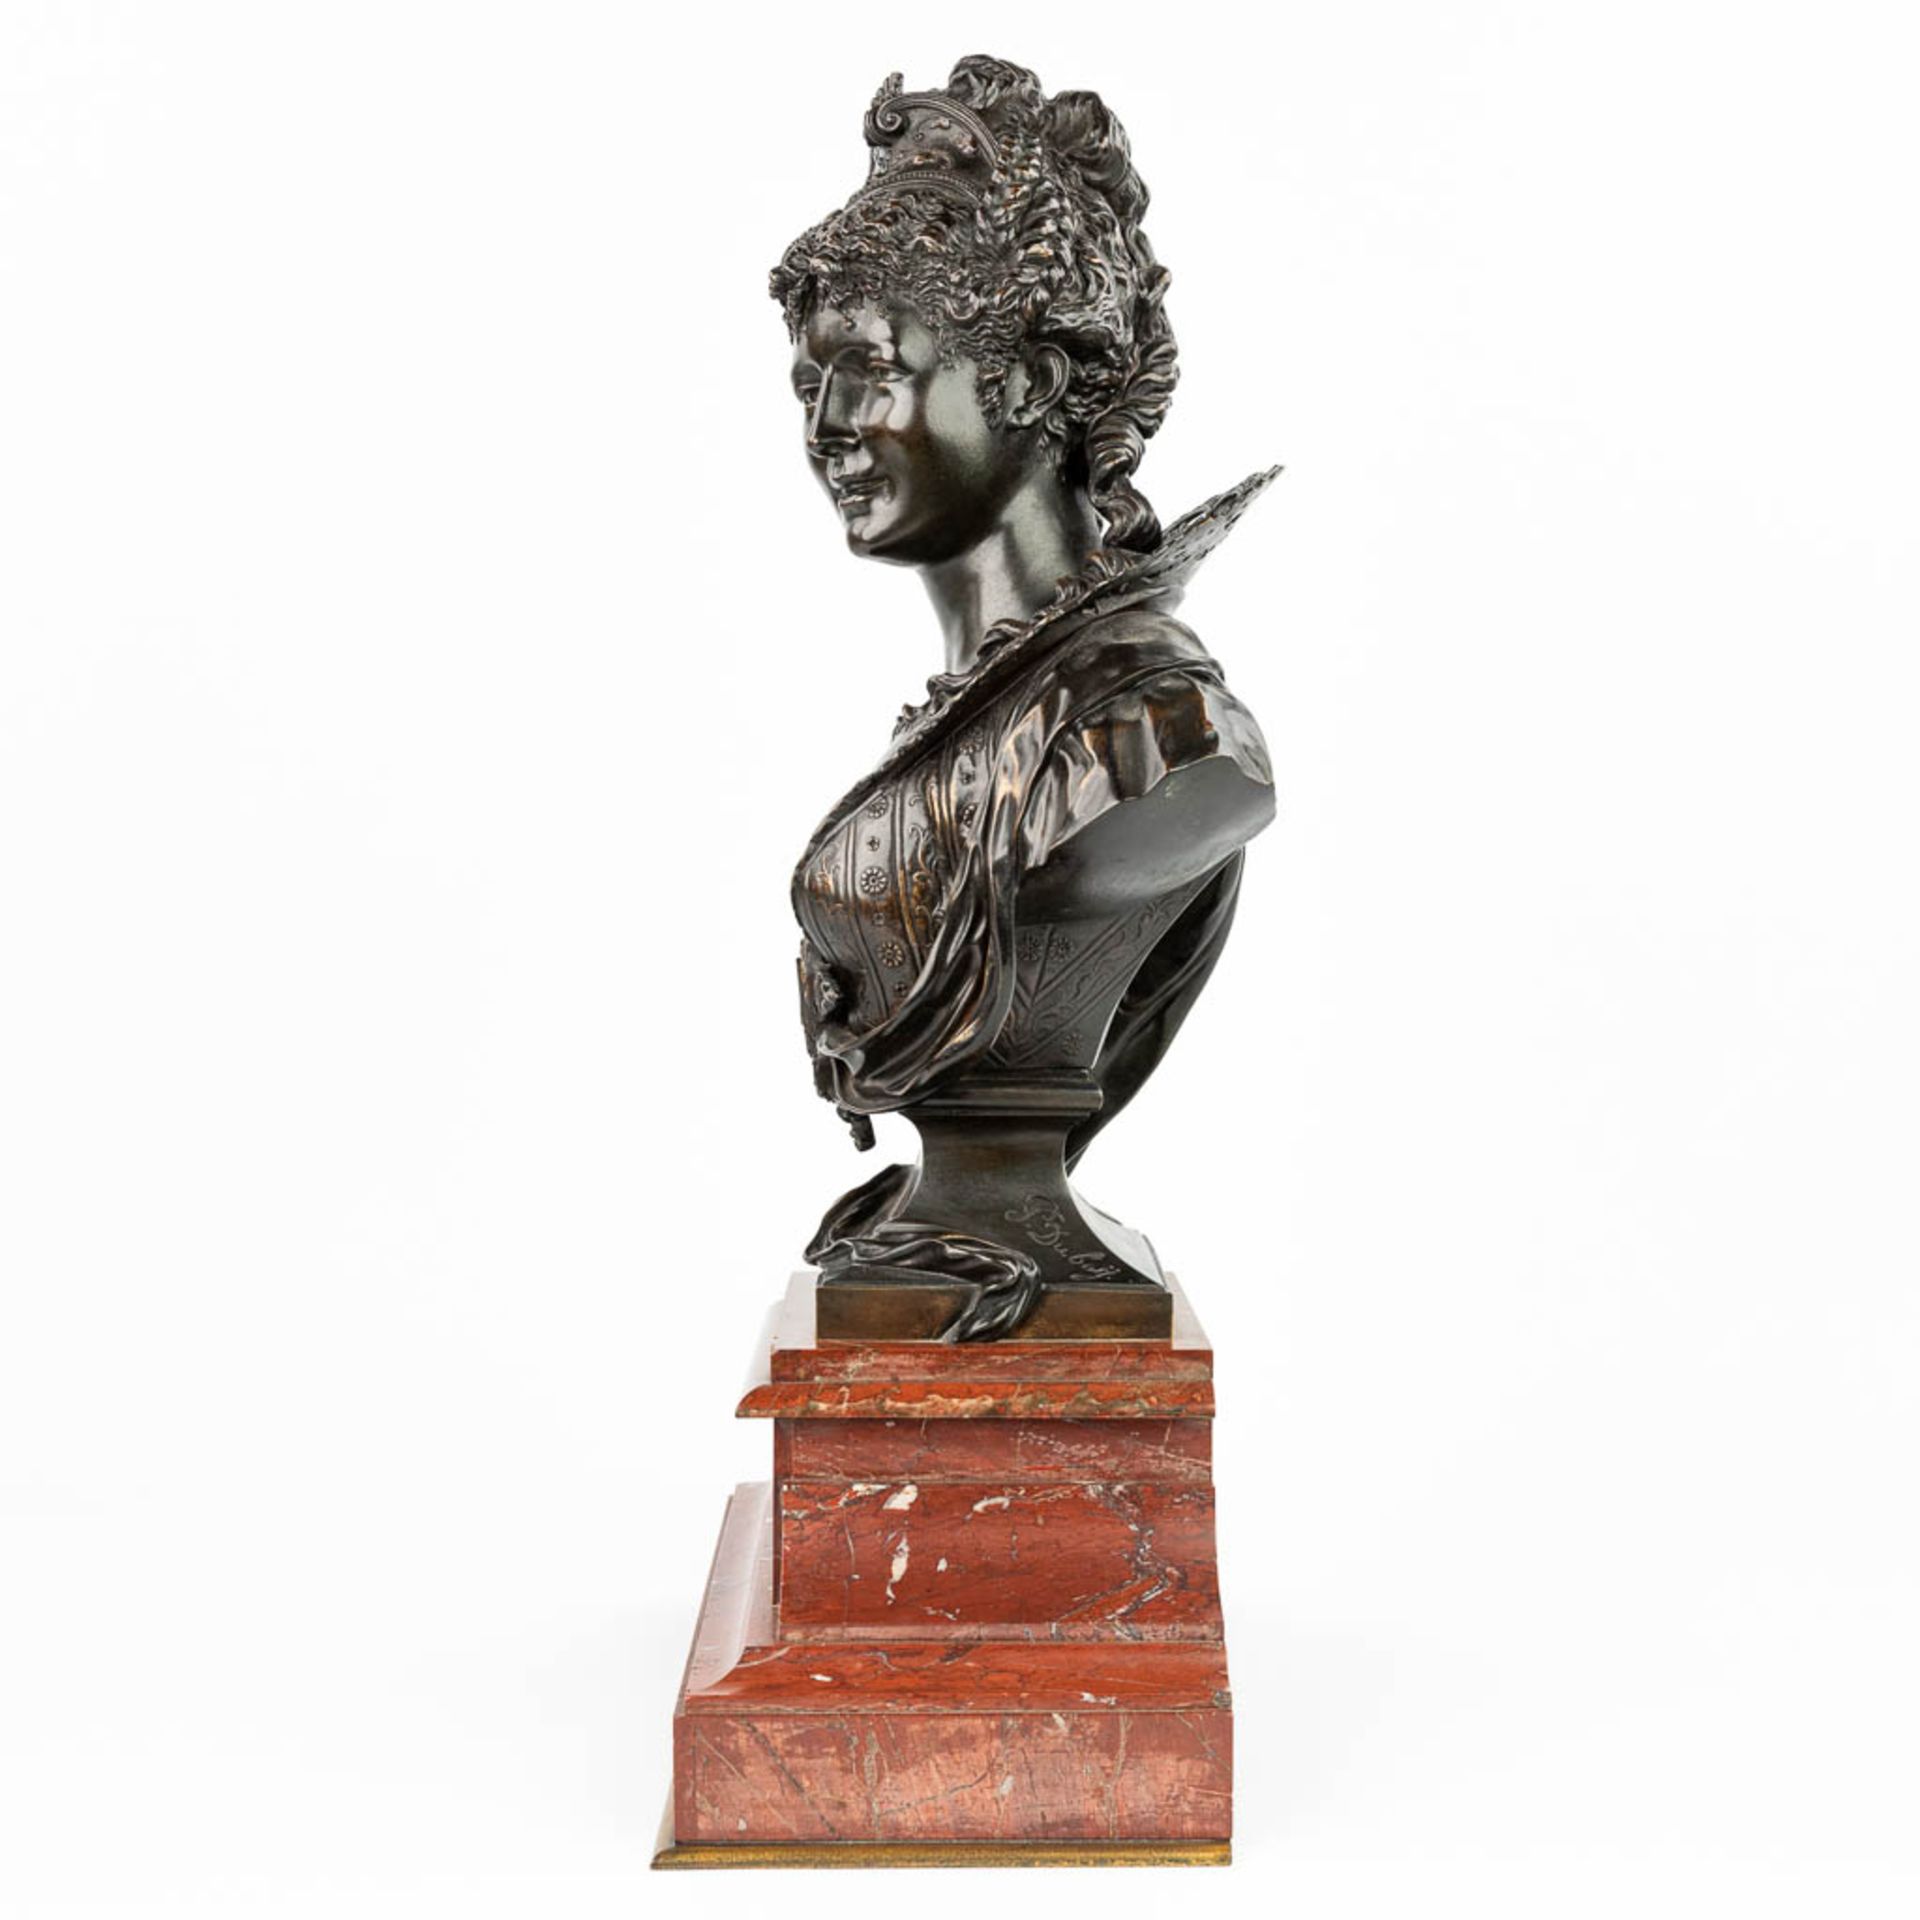 Paul DUBOIS (1829-1905) 'Beatrix' a bronze bust, mounted on a red marble base. (H:59cm) - Image 3 of 11